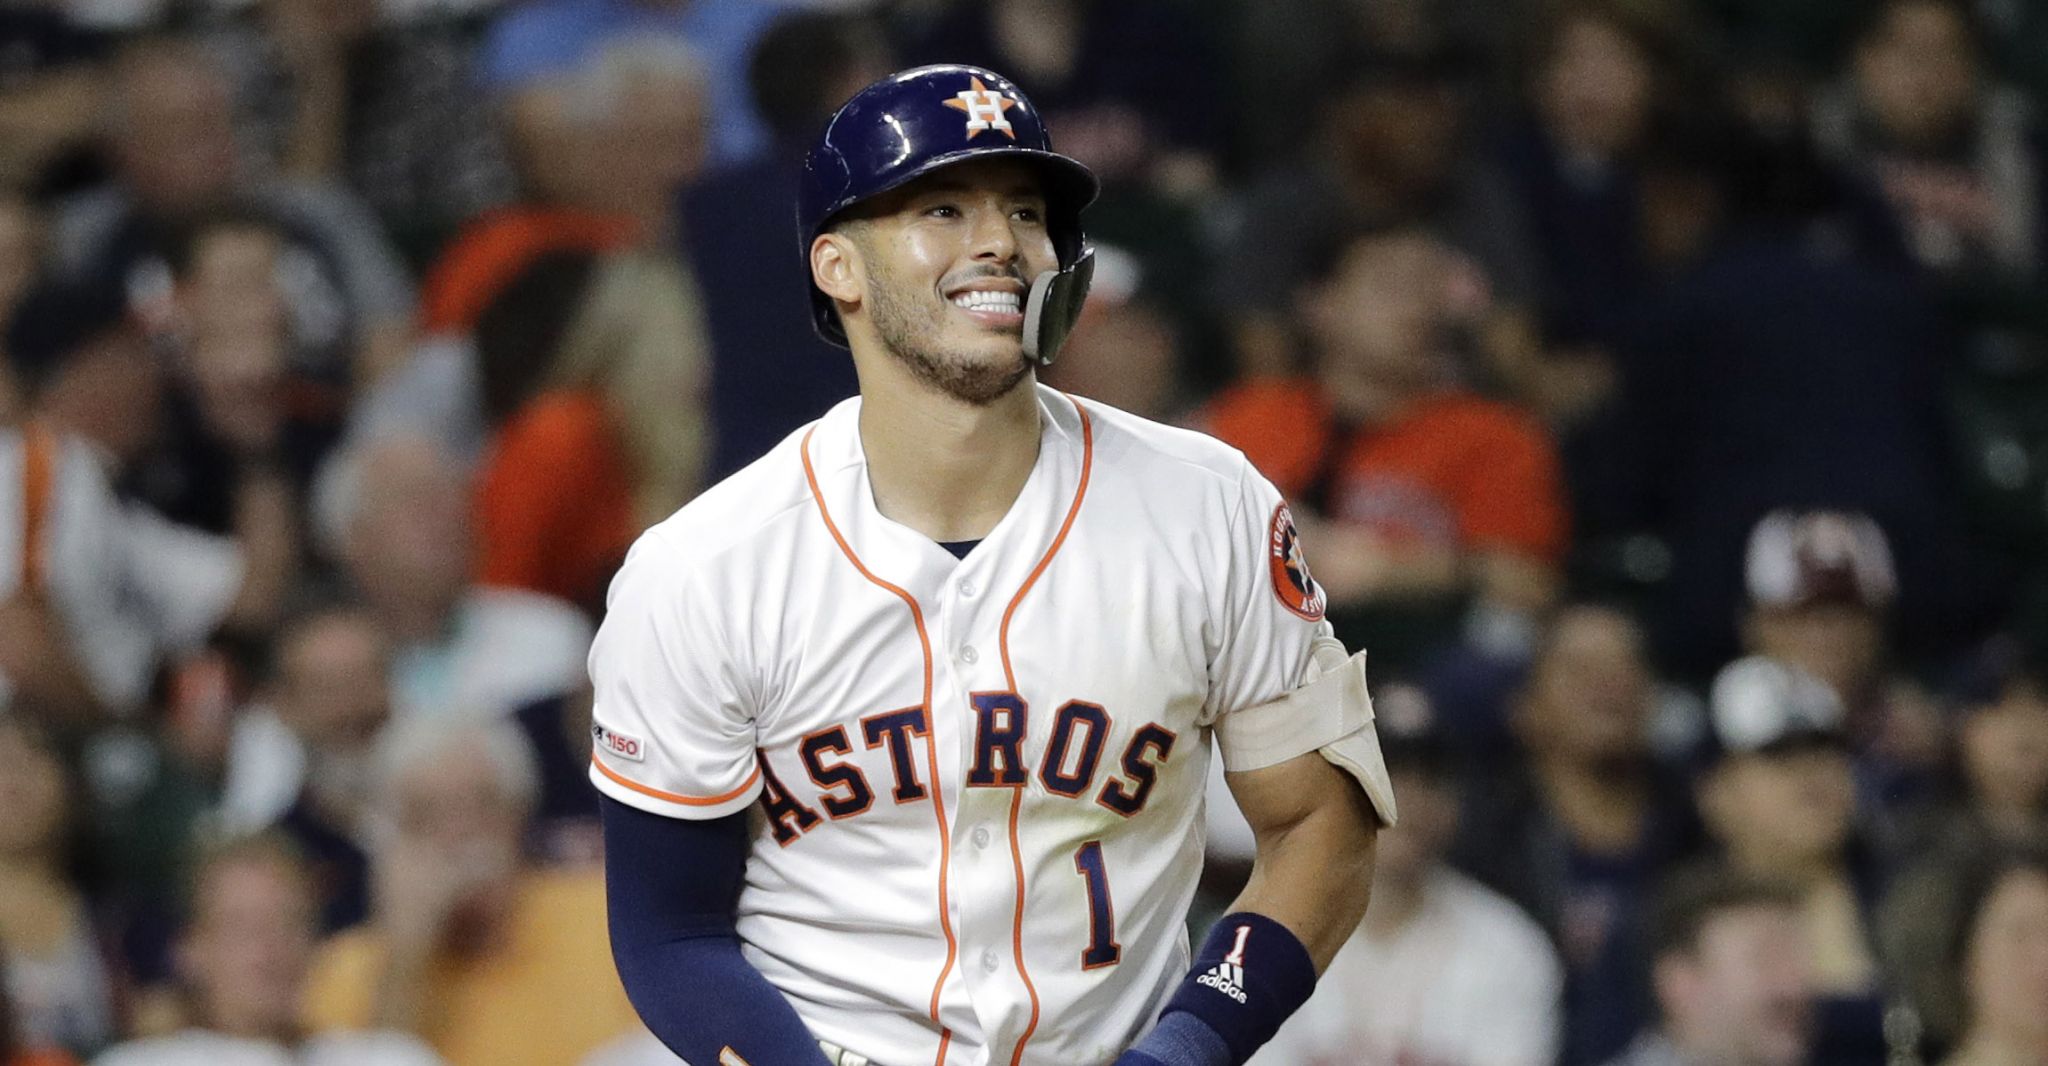 Concern grows for Astros' Carlos Correa as he remains out of lineup